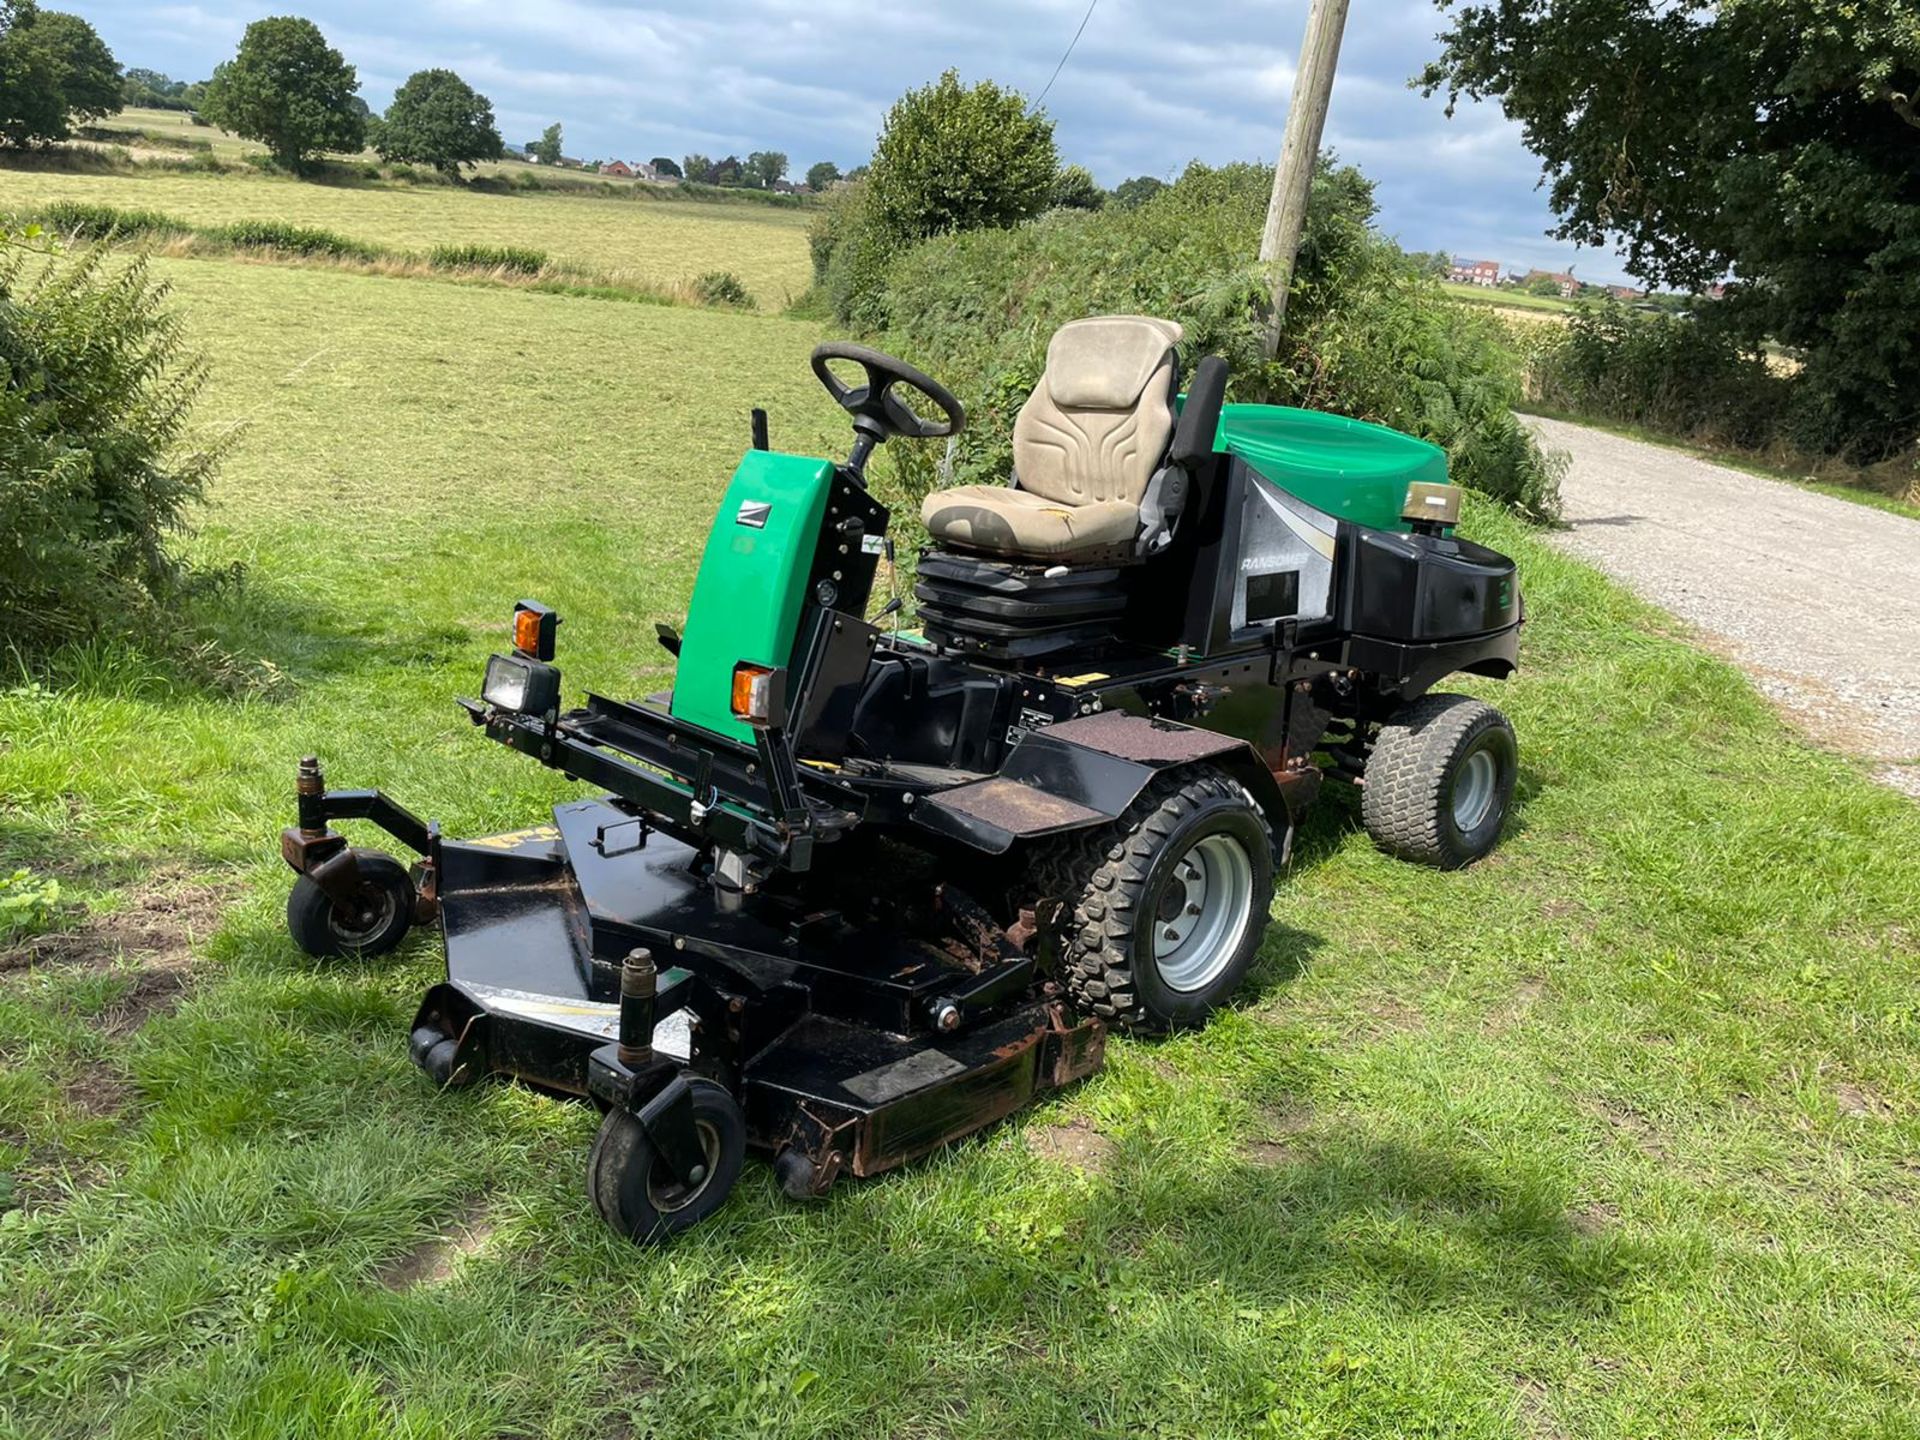 RANSOMES HR3806 RIDE ON MOWER, RUNS DRIVES AND CUTS, SHOWING 2917 HOURS, HYDROSTATIC *PLUS VAT*